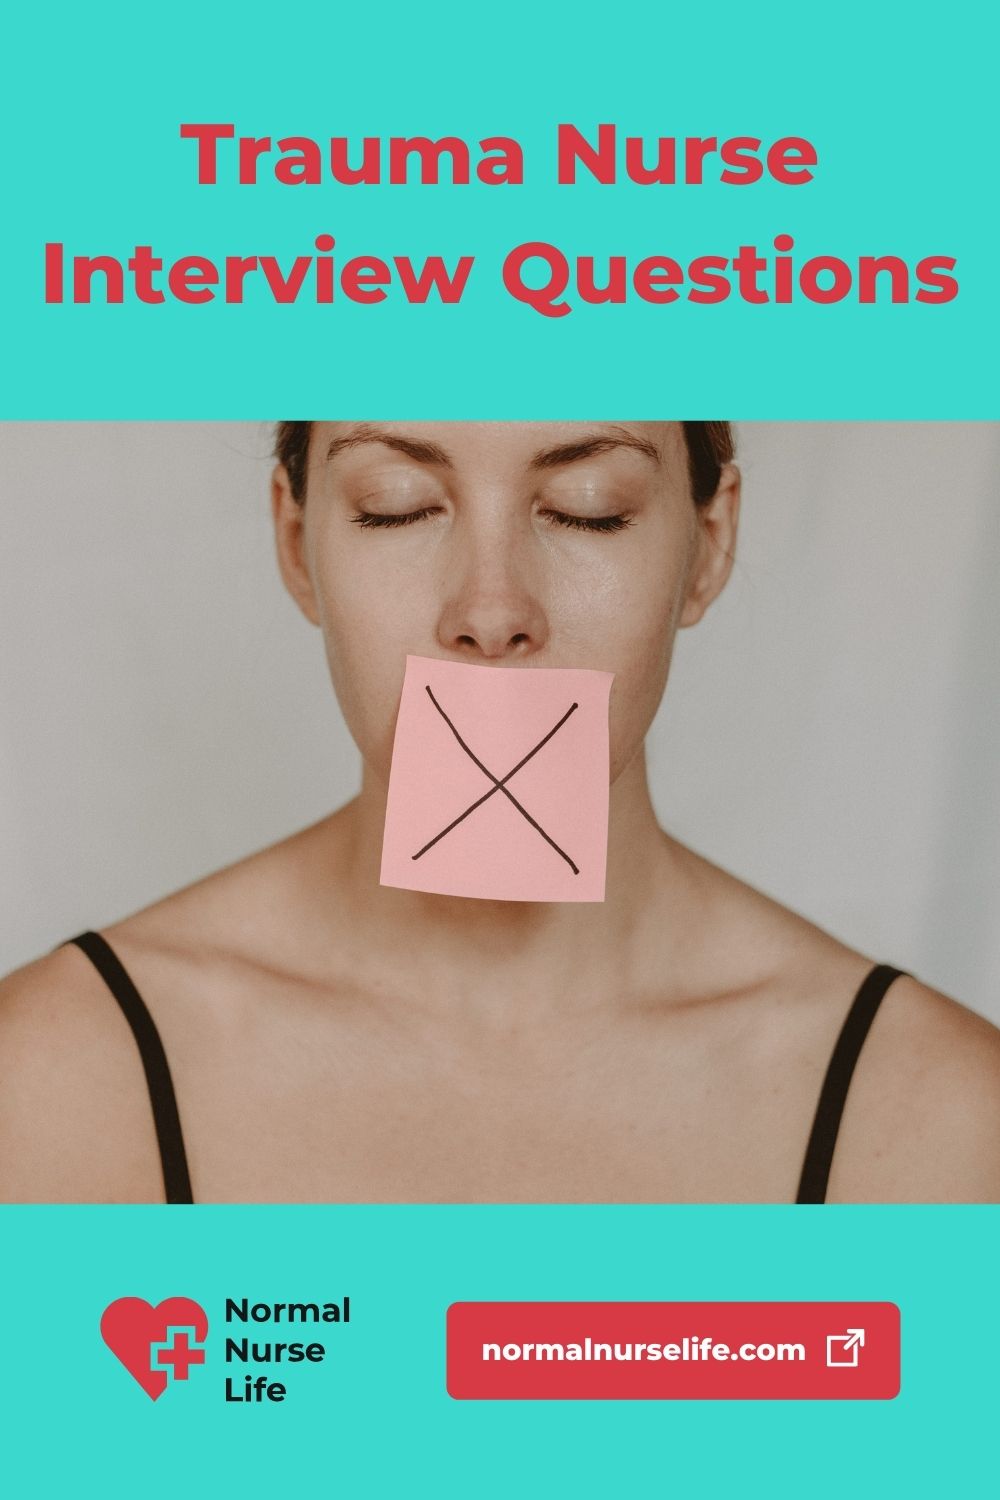 Interview questions for trauma nurses